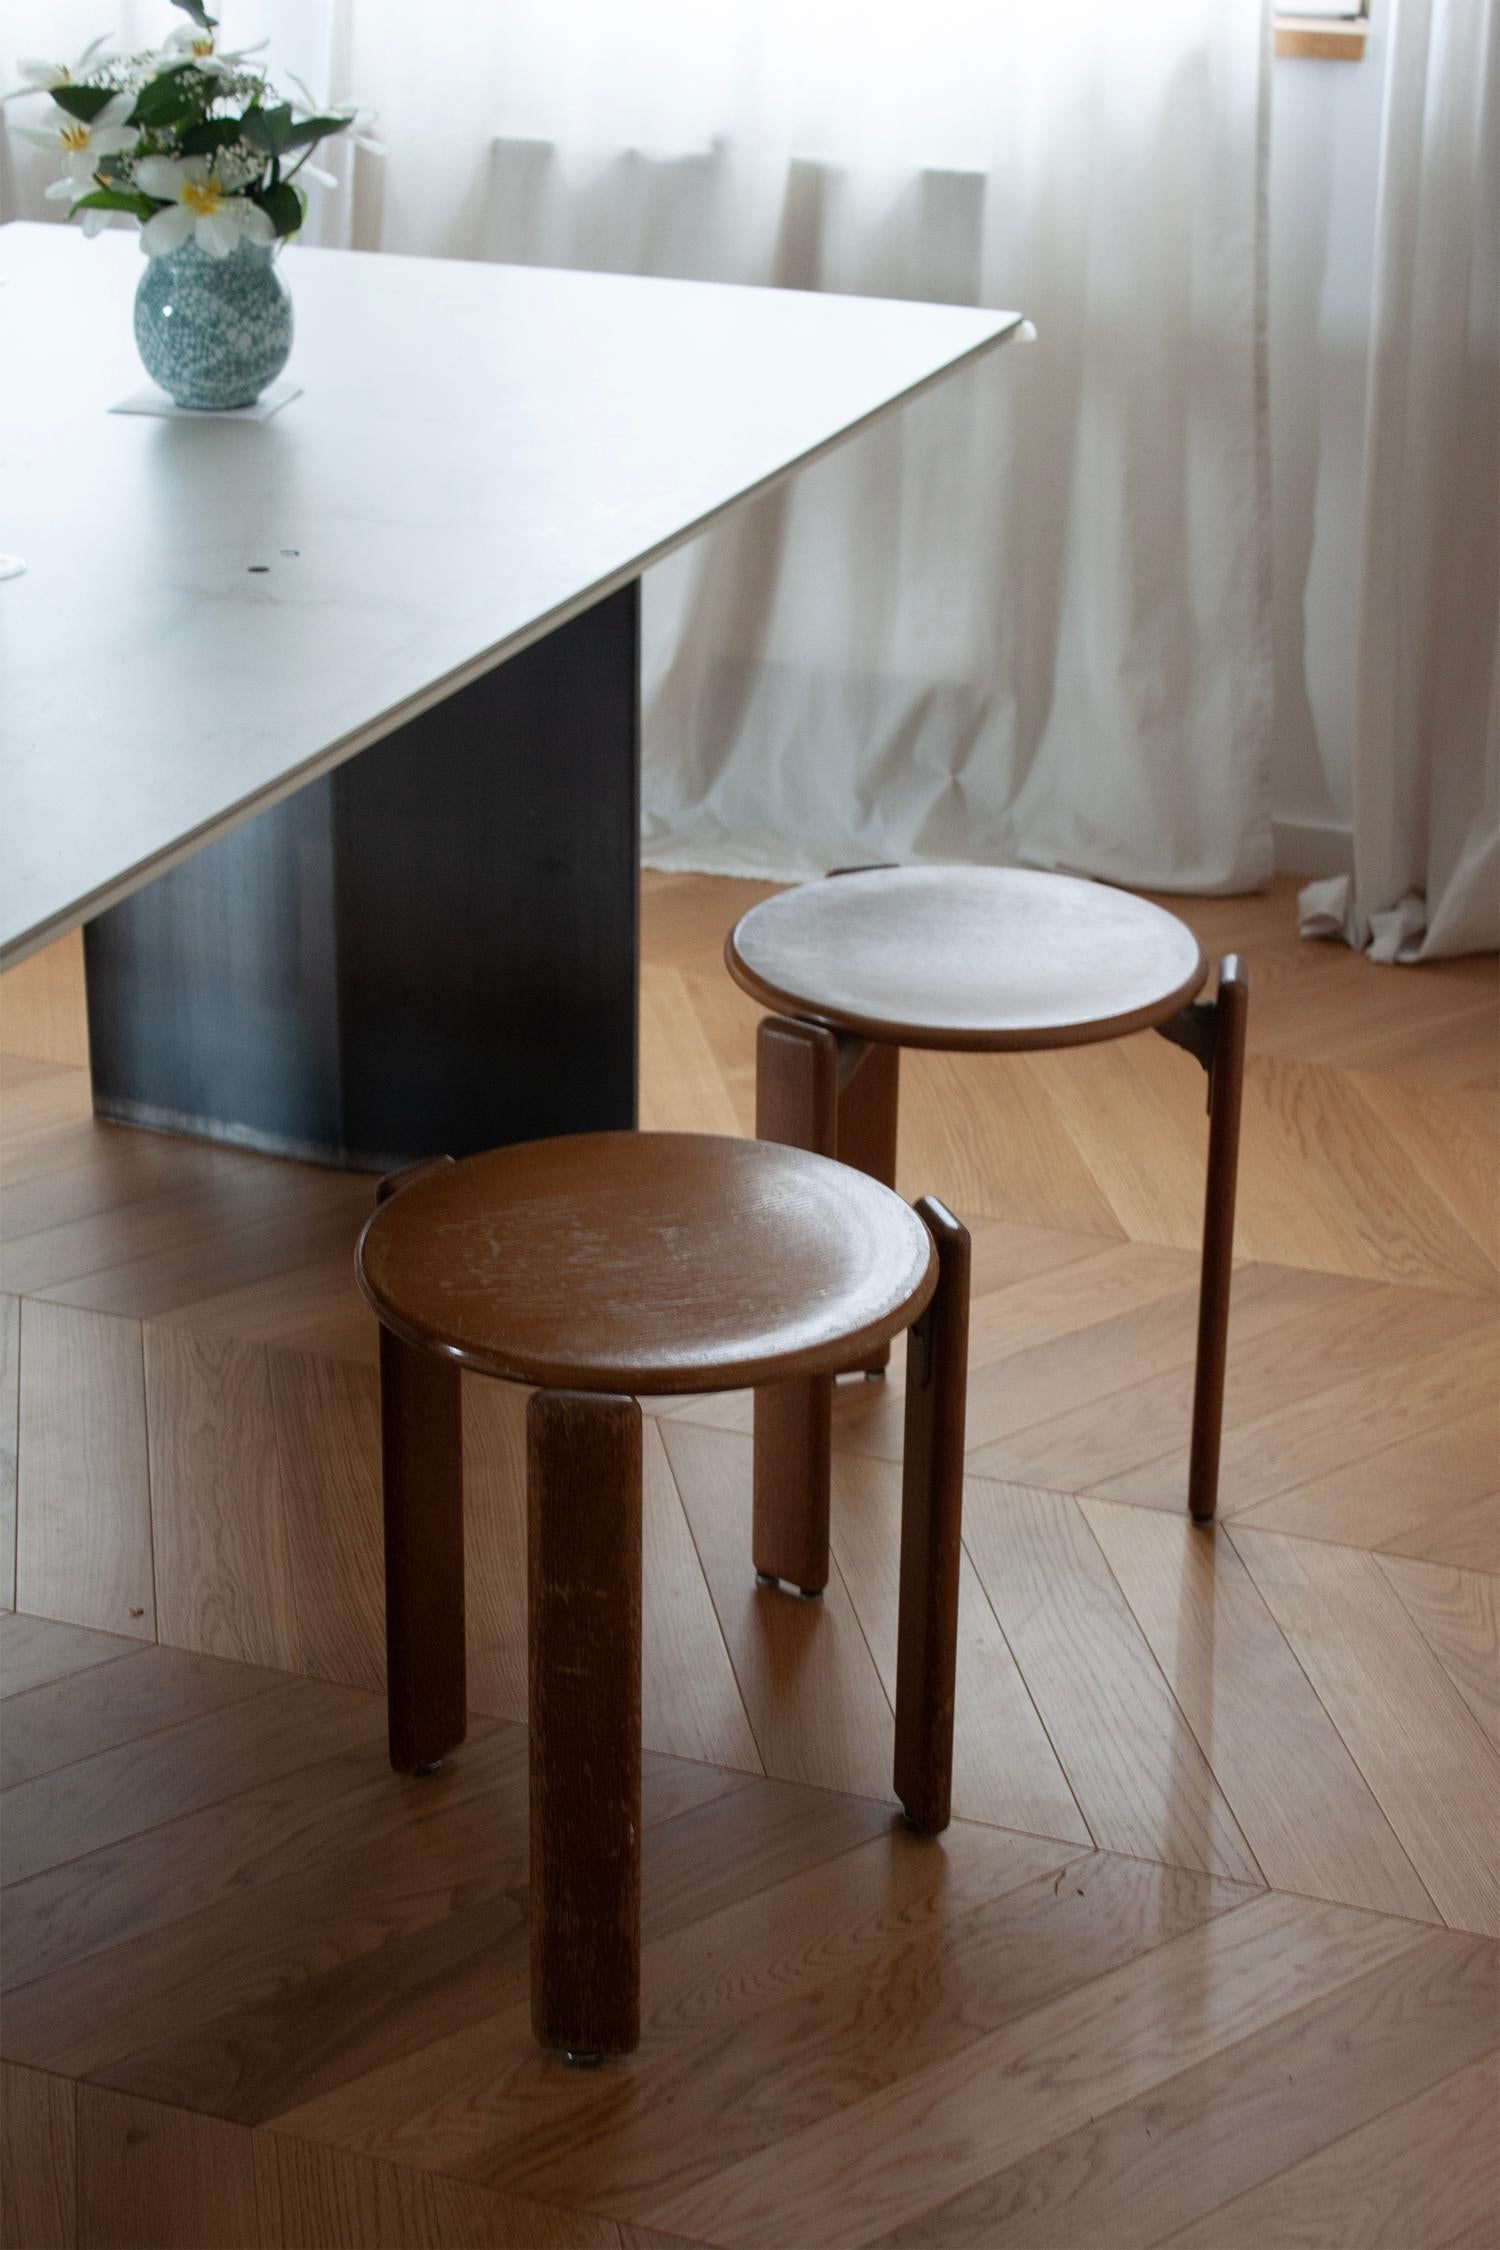 On offer is a set of 3-legged Ray stools from the 1970s. Designed by Bruno Rey and Made by Dietiker in Stein am Rhein Switzerland.

The 3 Legged versions is a real design classic and is not being produced anymore

These swiss design classics